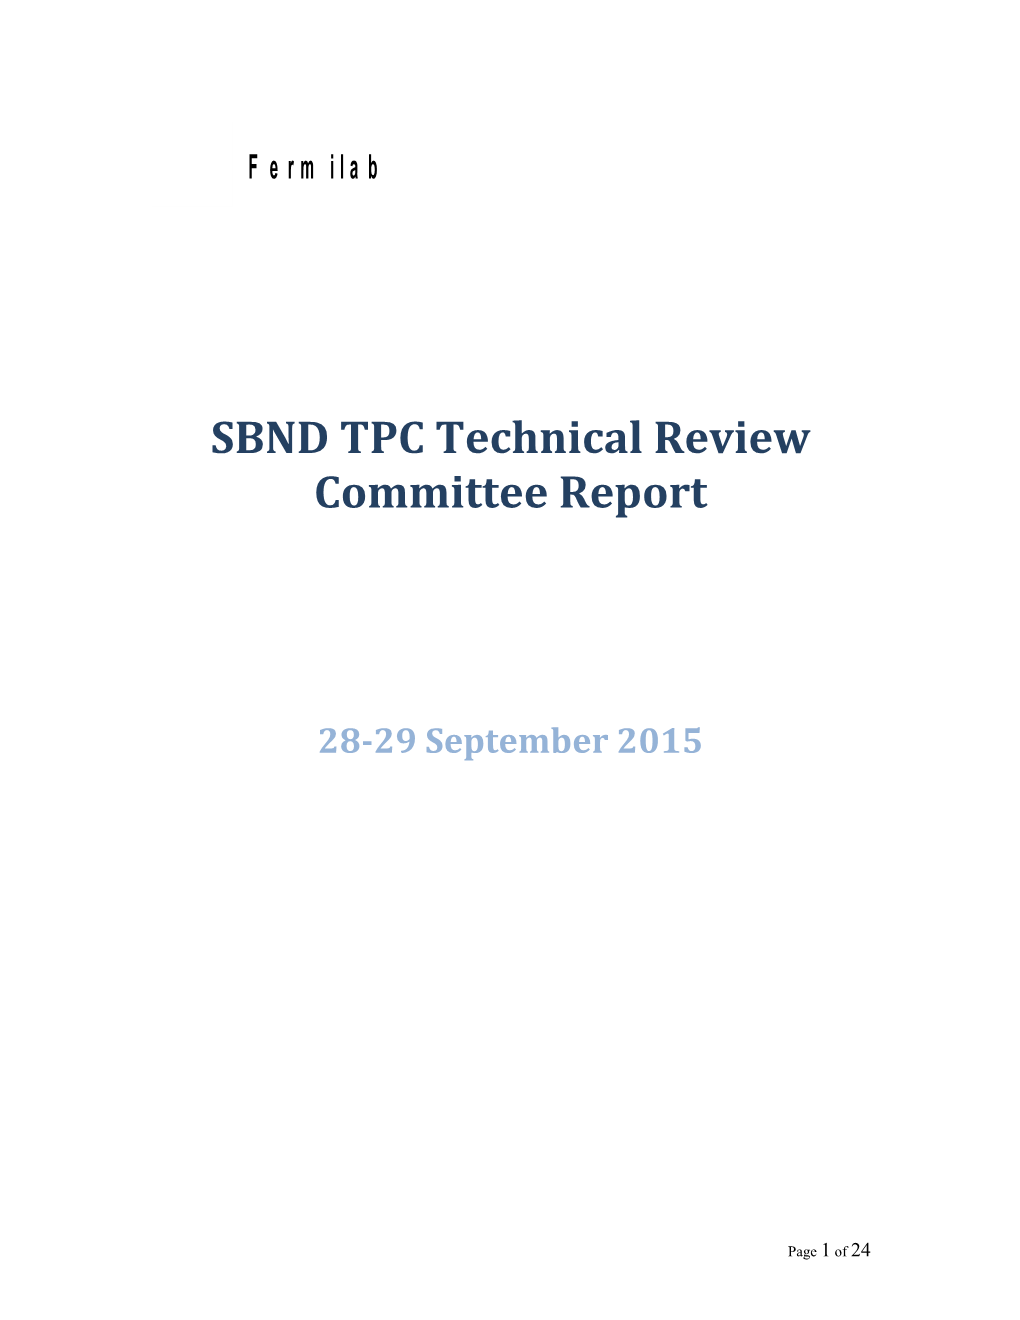 SBND TPC Technical Review Committee Report